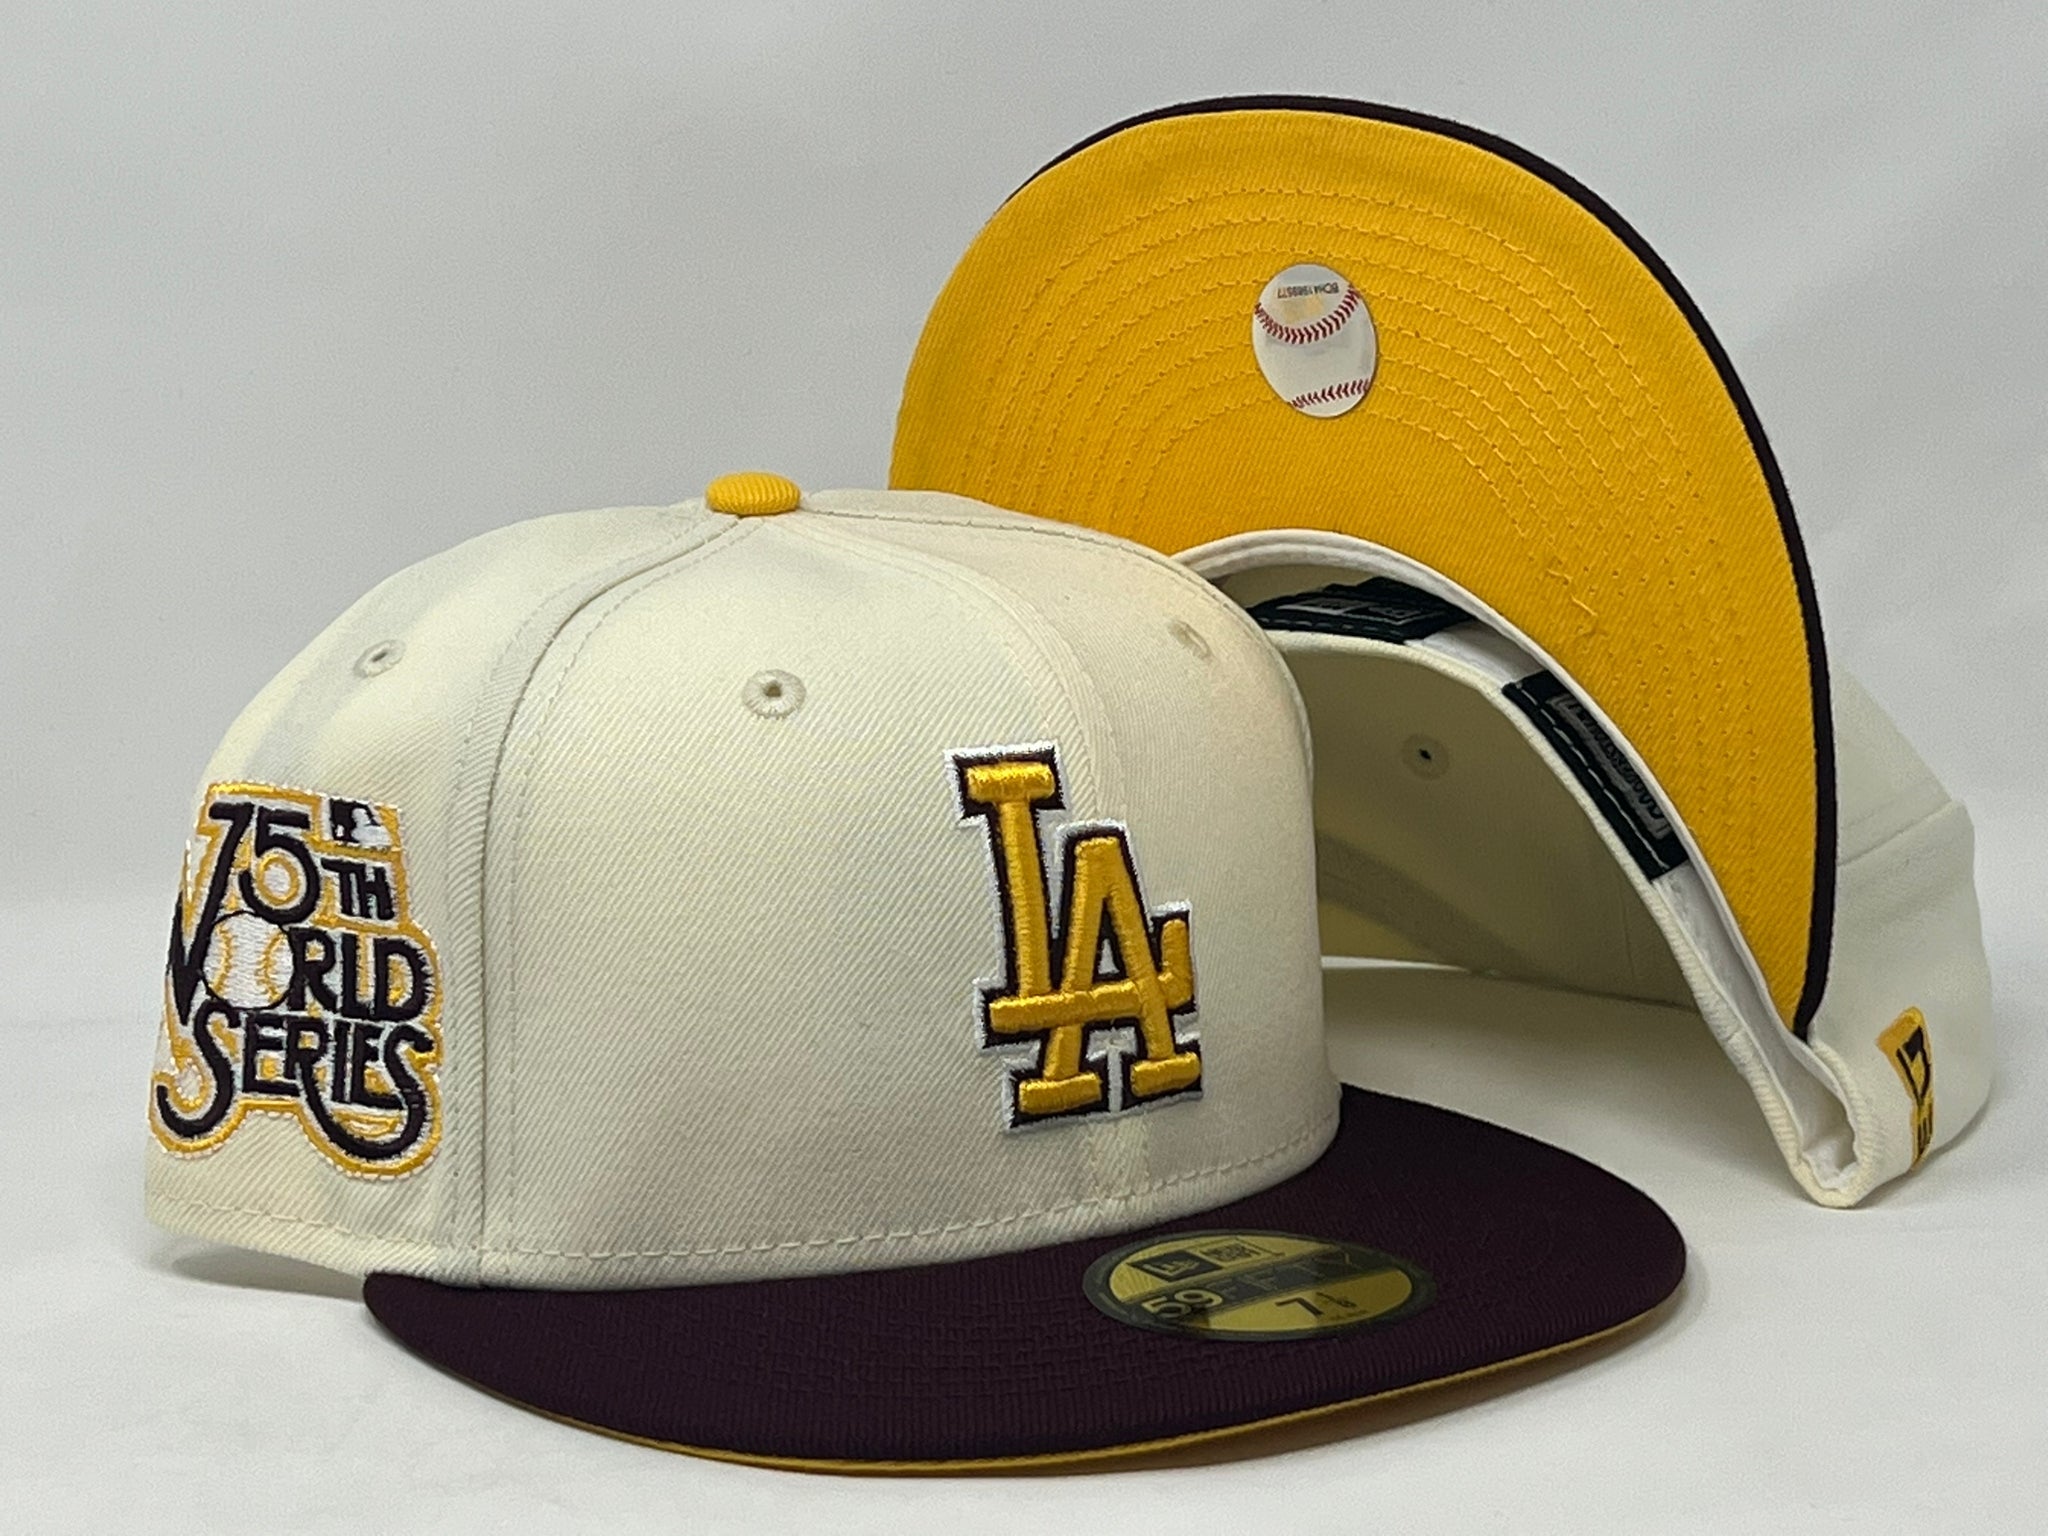 LOS ANGELES DODGERS 75TH WORLD SERIES OFF WHITE MAROON VISOR TAXI